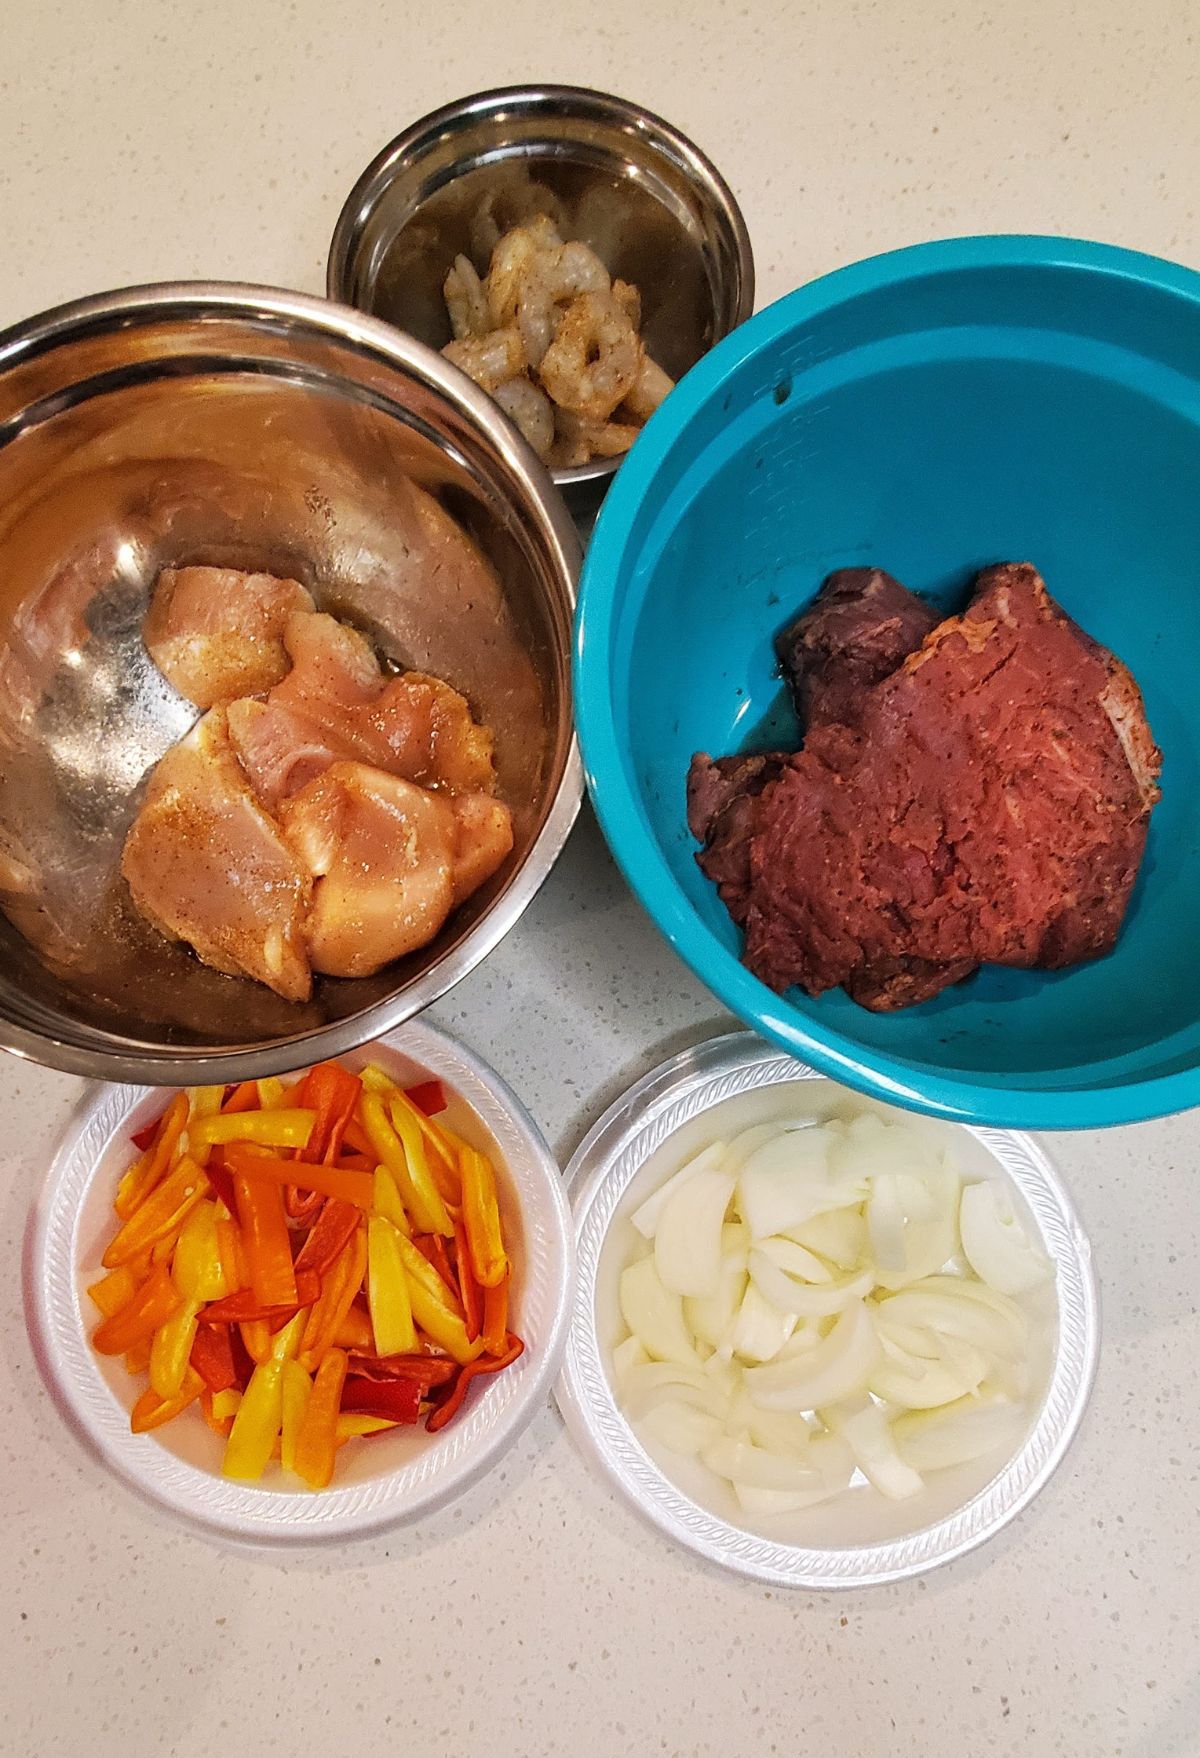 Ingredients for cooking laid out on a counter: seasoned chicken, shrimp, ground beef, sliced bell peppers, and onions in separate bowls.